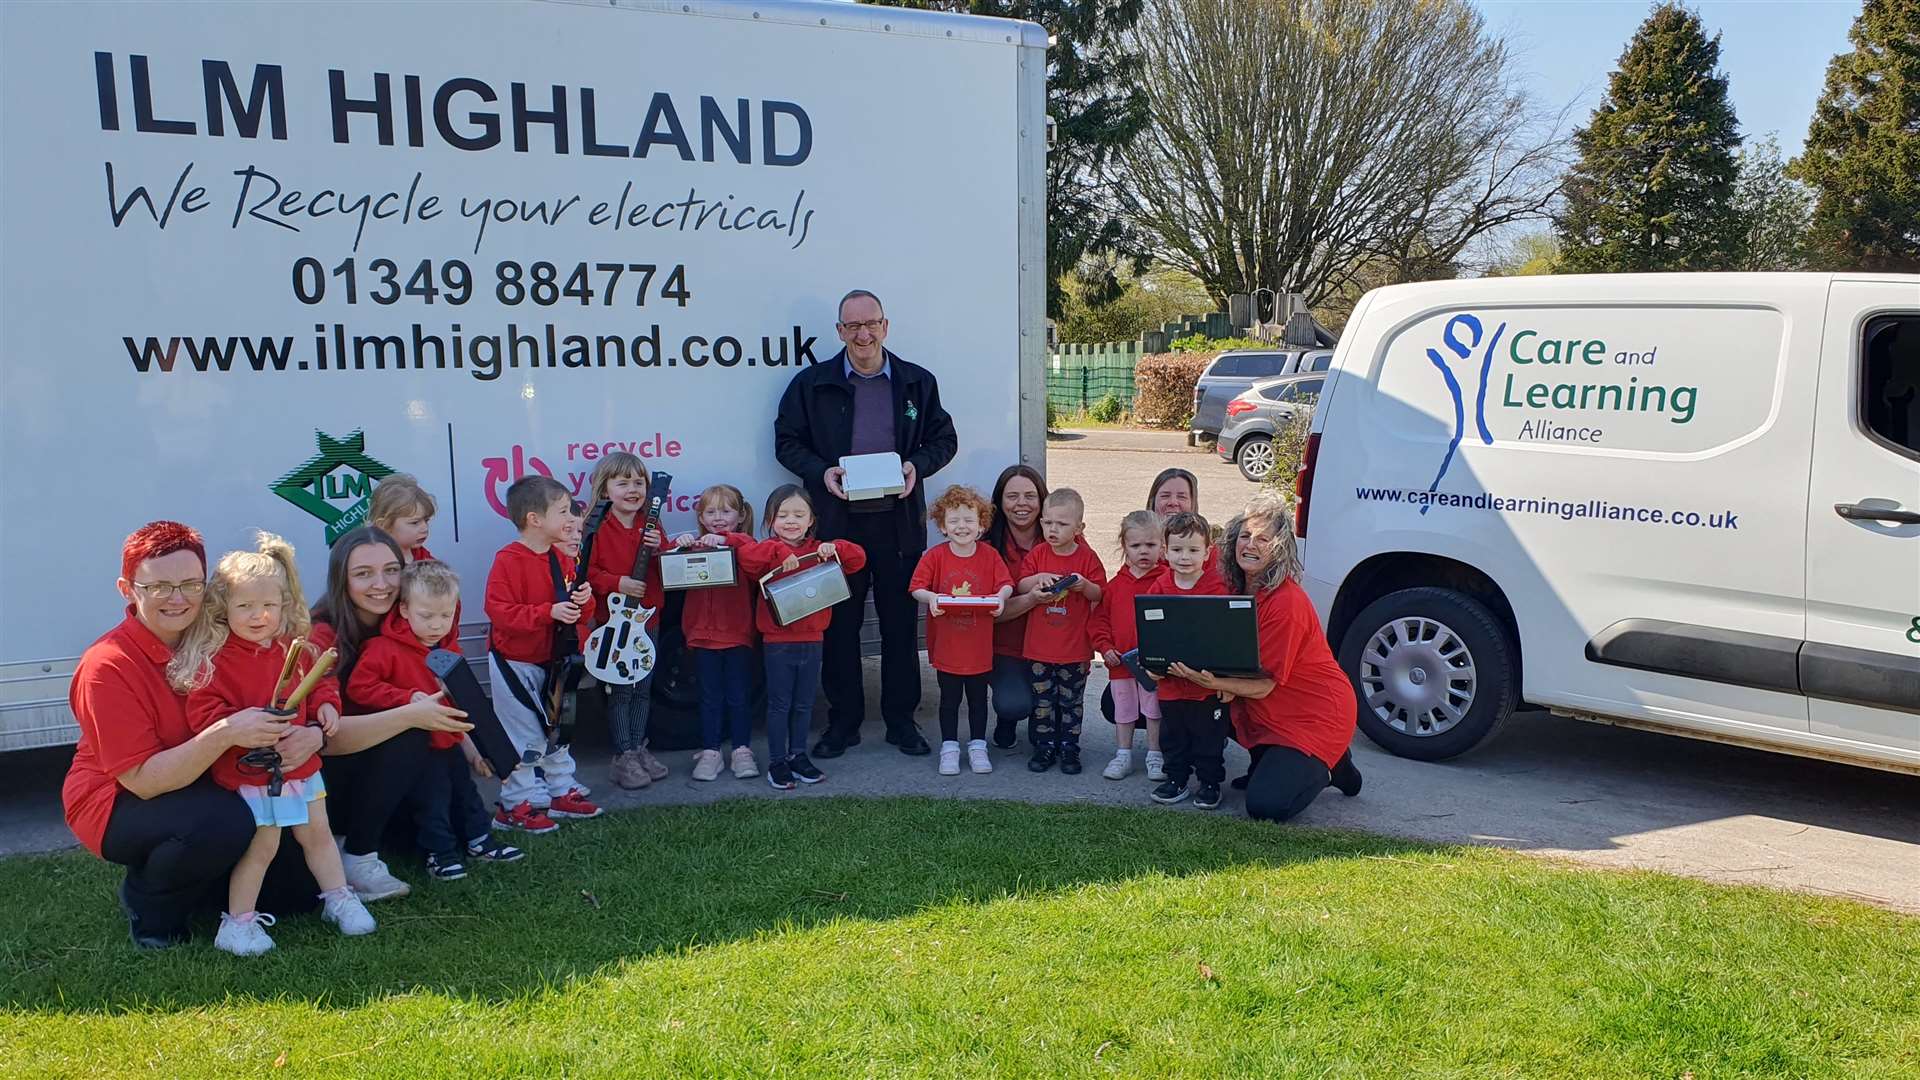 Dingwall Ducklings and ILM Highland have been doing their bit for World Earth Day.